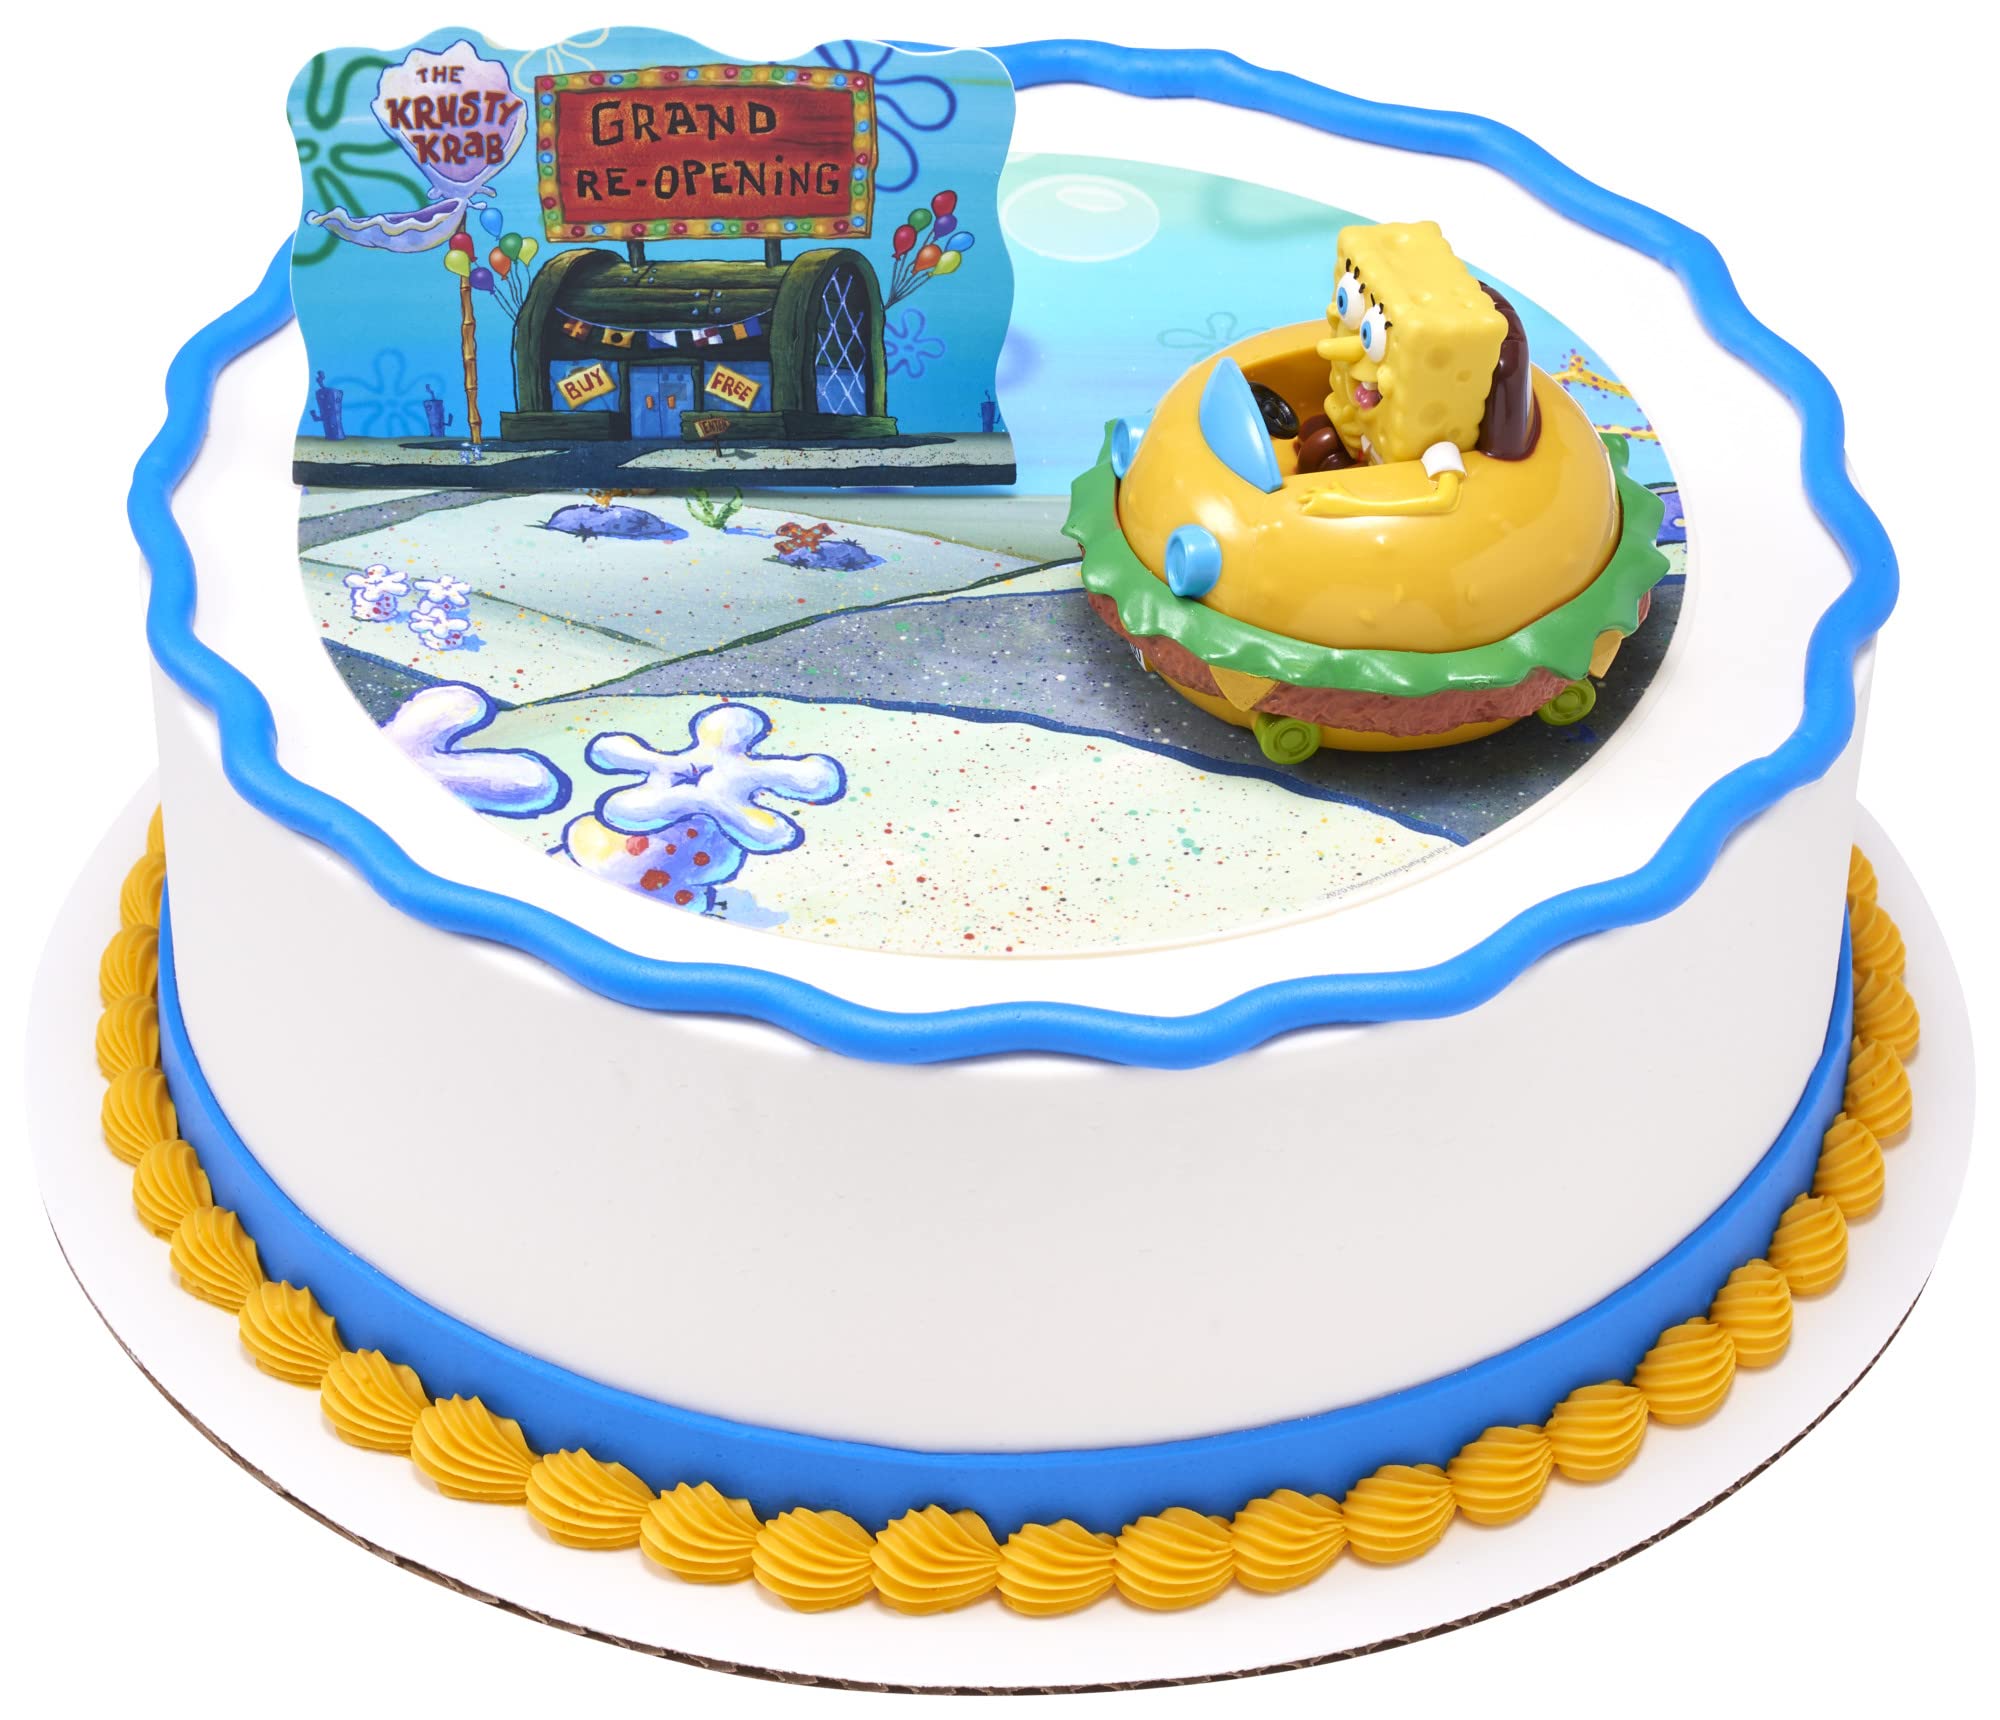 DecoSet® SpongeBob Square Pants Krabby Patty Cake Topper, 2-Piece Birthday Party Set with Rolling Car Figure for Fun After the Party, 3"H x 4.25"W